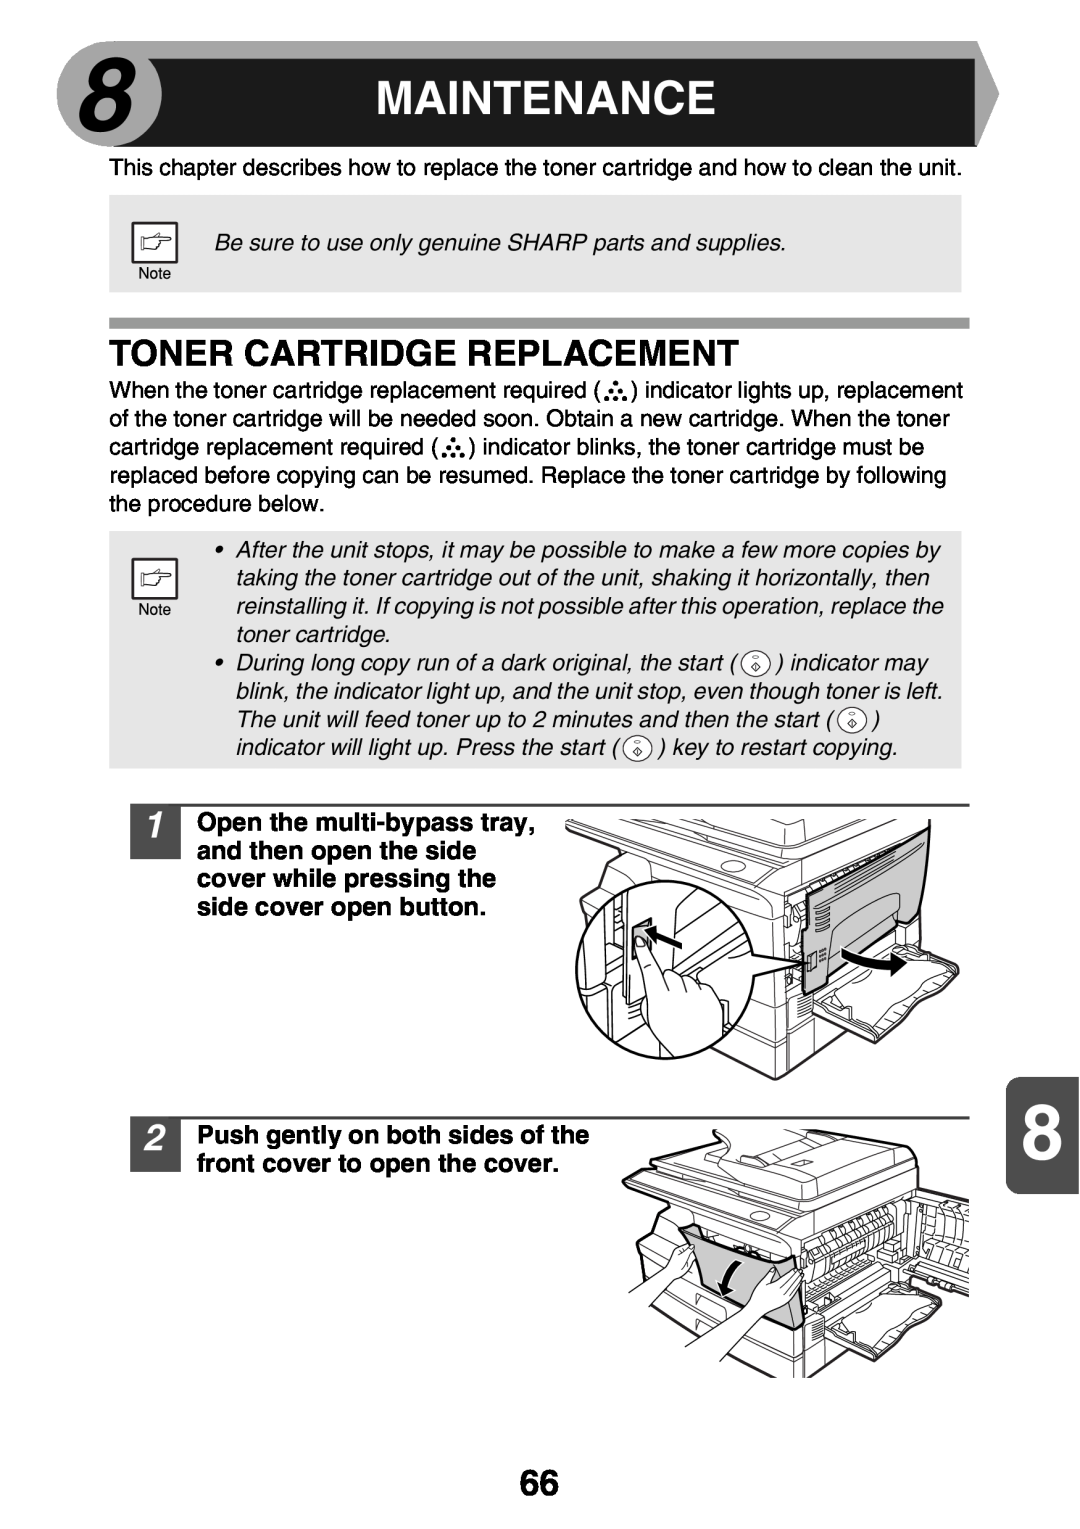 Sharp MX-B200 Maintenance, Toner Cartridge Replacement, Push gently on both sides of the, front cover to open the cover 